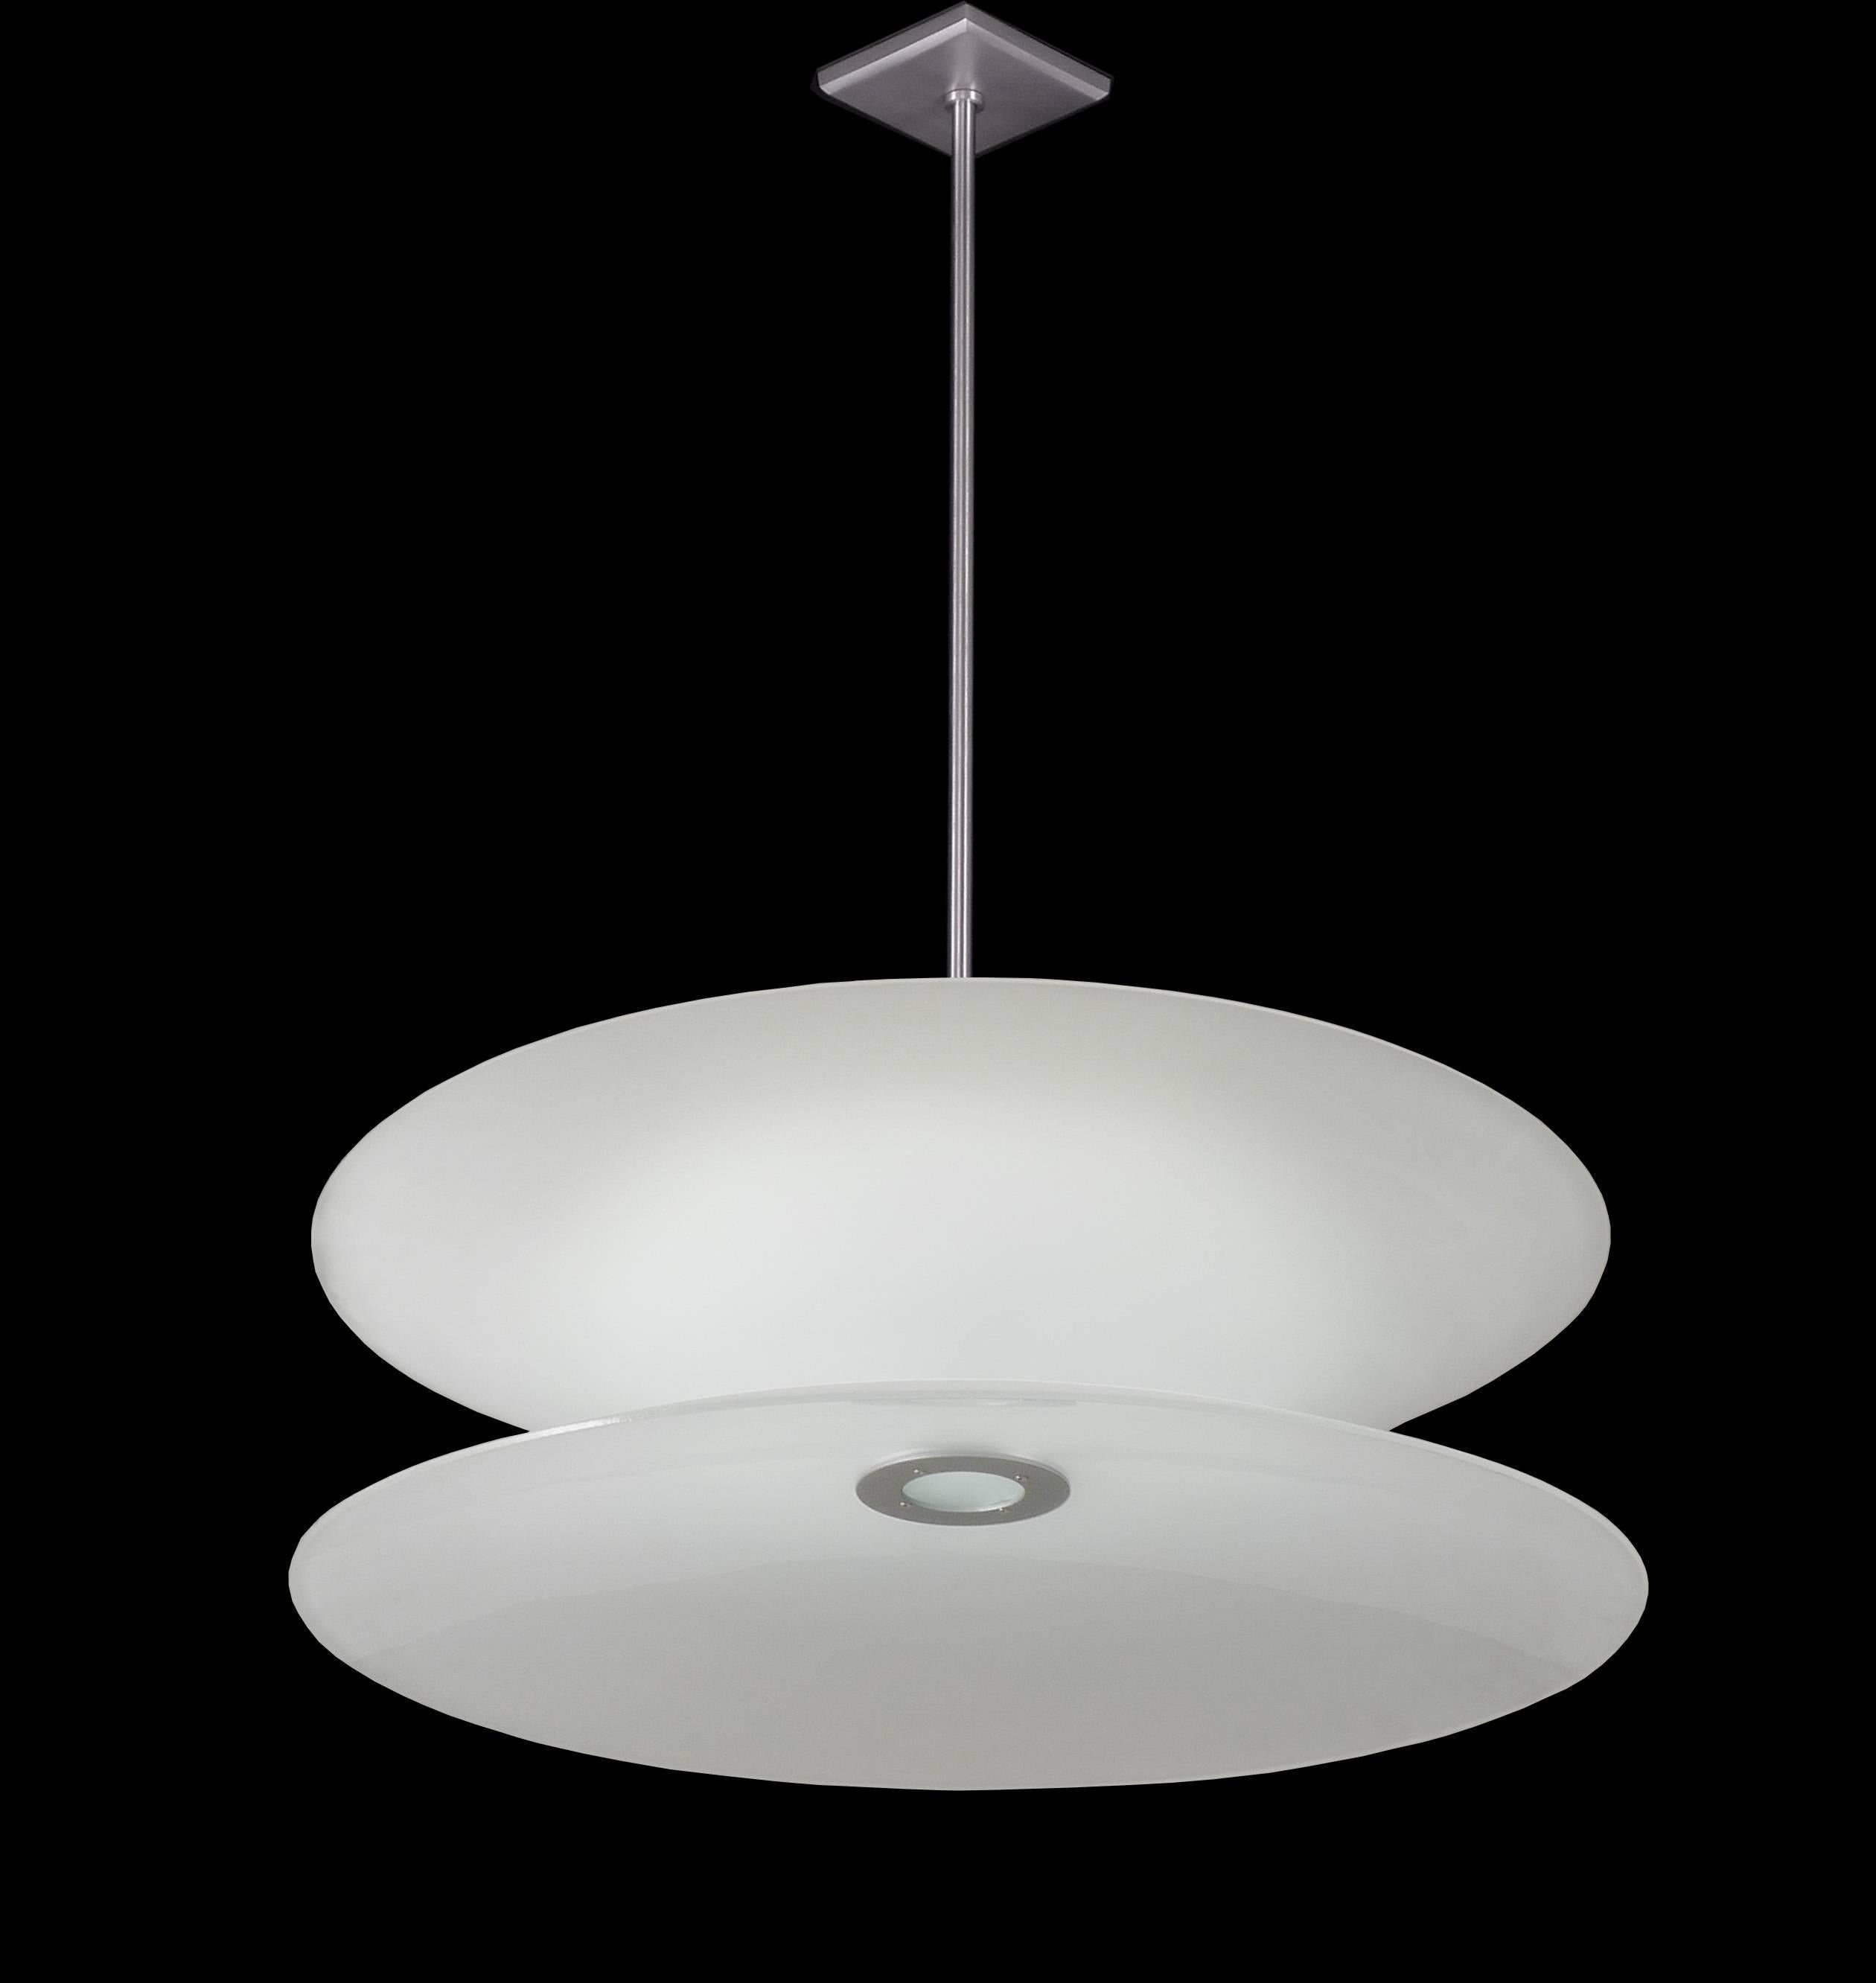 LED glass pendant with up and down light control on separate circuits, 32